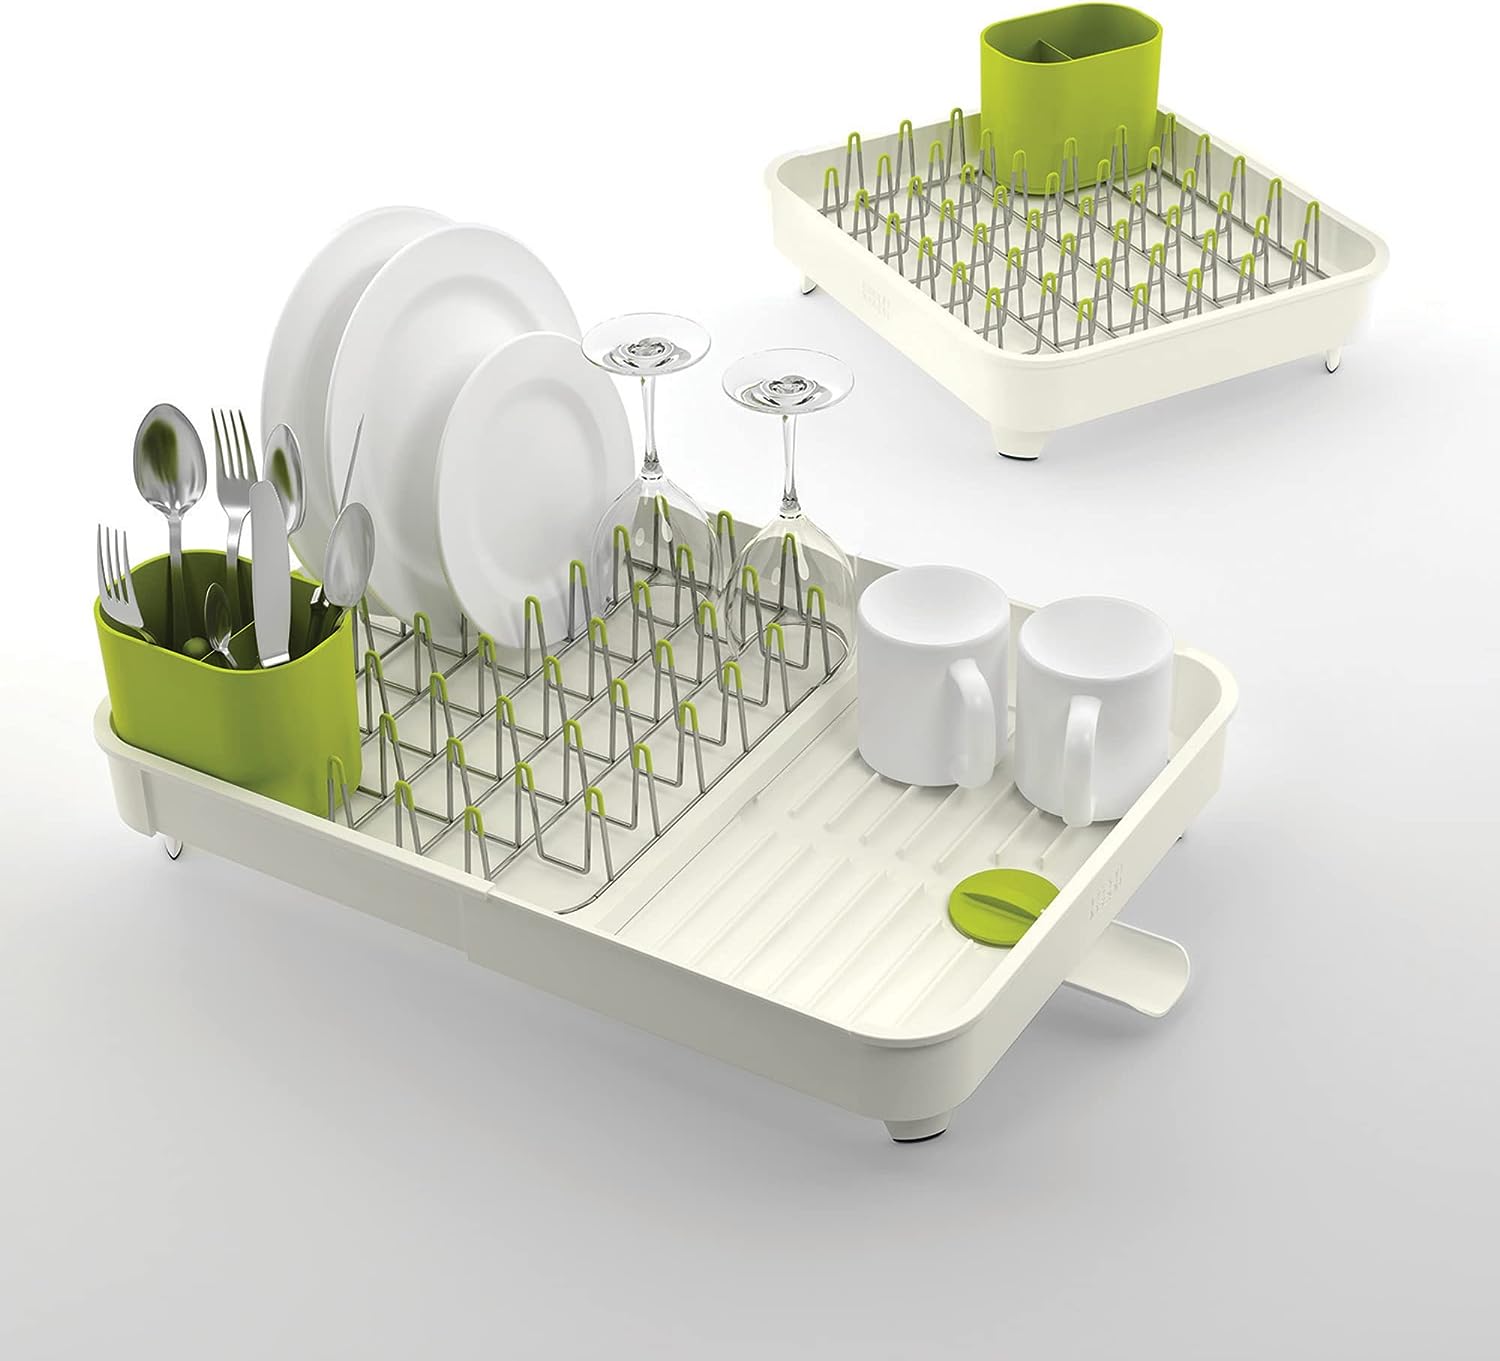 https://bigbigmart.com/wp-content/uploads/2023/10/Joseph-Joseph-85071-Extend-Expandable-Dish-Drying-Rack-and-Drainboard-Set-Foldaway-Integrated-Spout-Drainer-Removable-Steel-Rack-and-Cutlery-Holder-WhiteWhite-Green-Plastic1.jpg